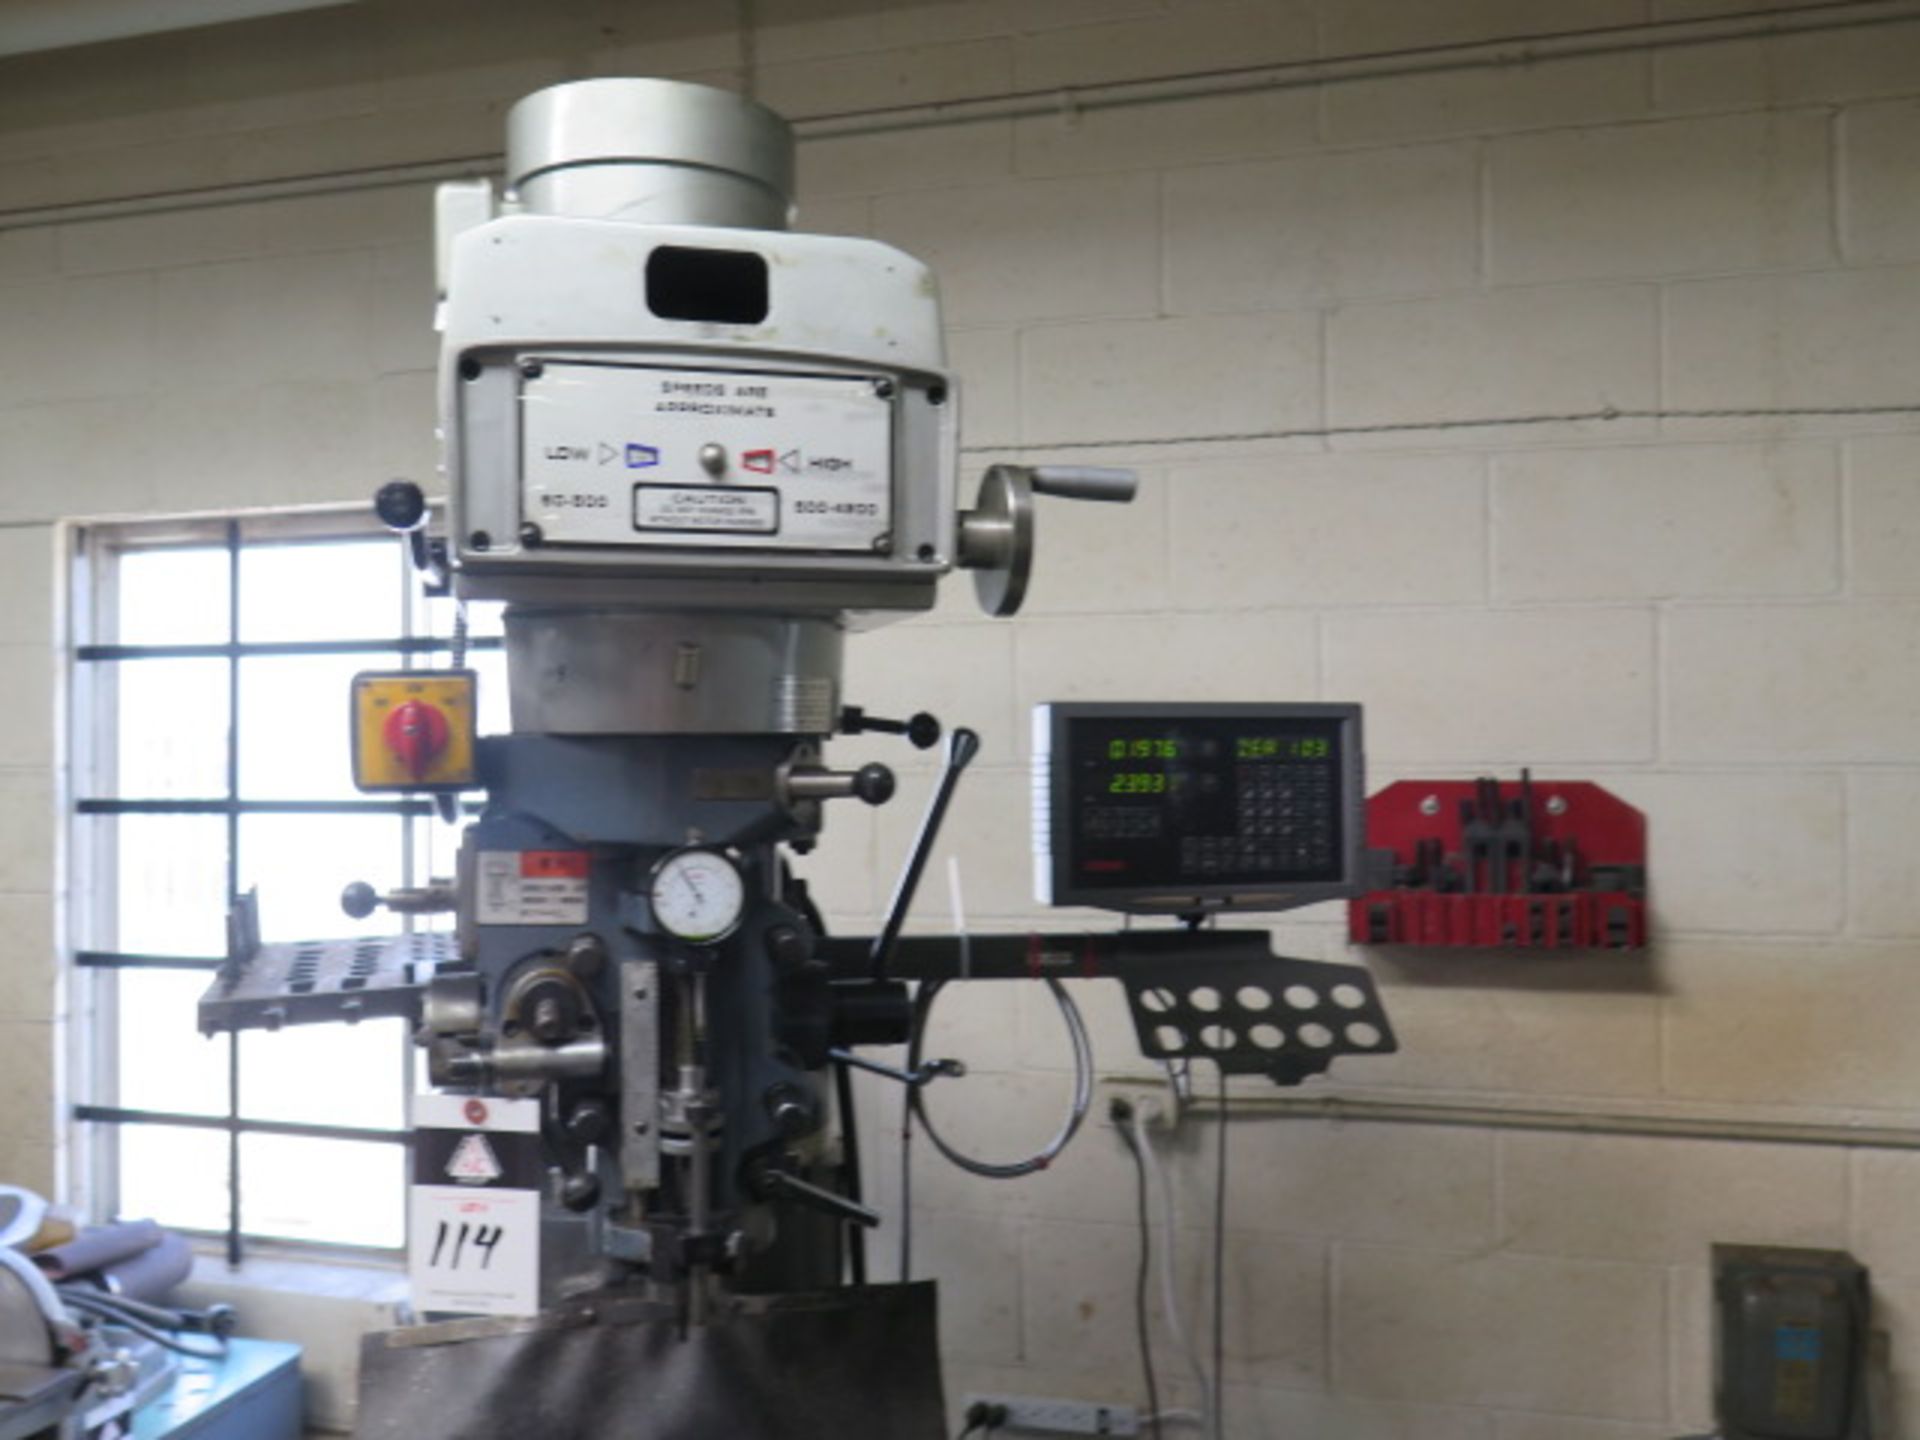 Import Vertical Mill s/n F050909 w/ Contour SDS2MS Prog DRO, 3Hp Motor, 60-4200 Dial, SOLD AS IS - Image 3 of 12